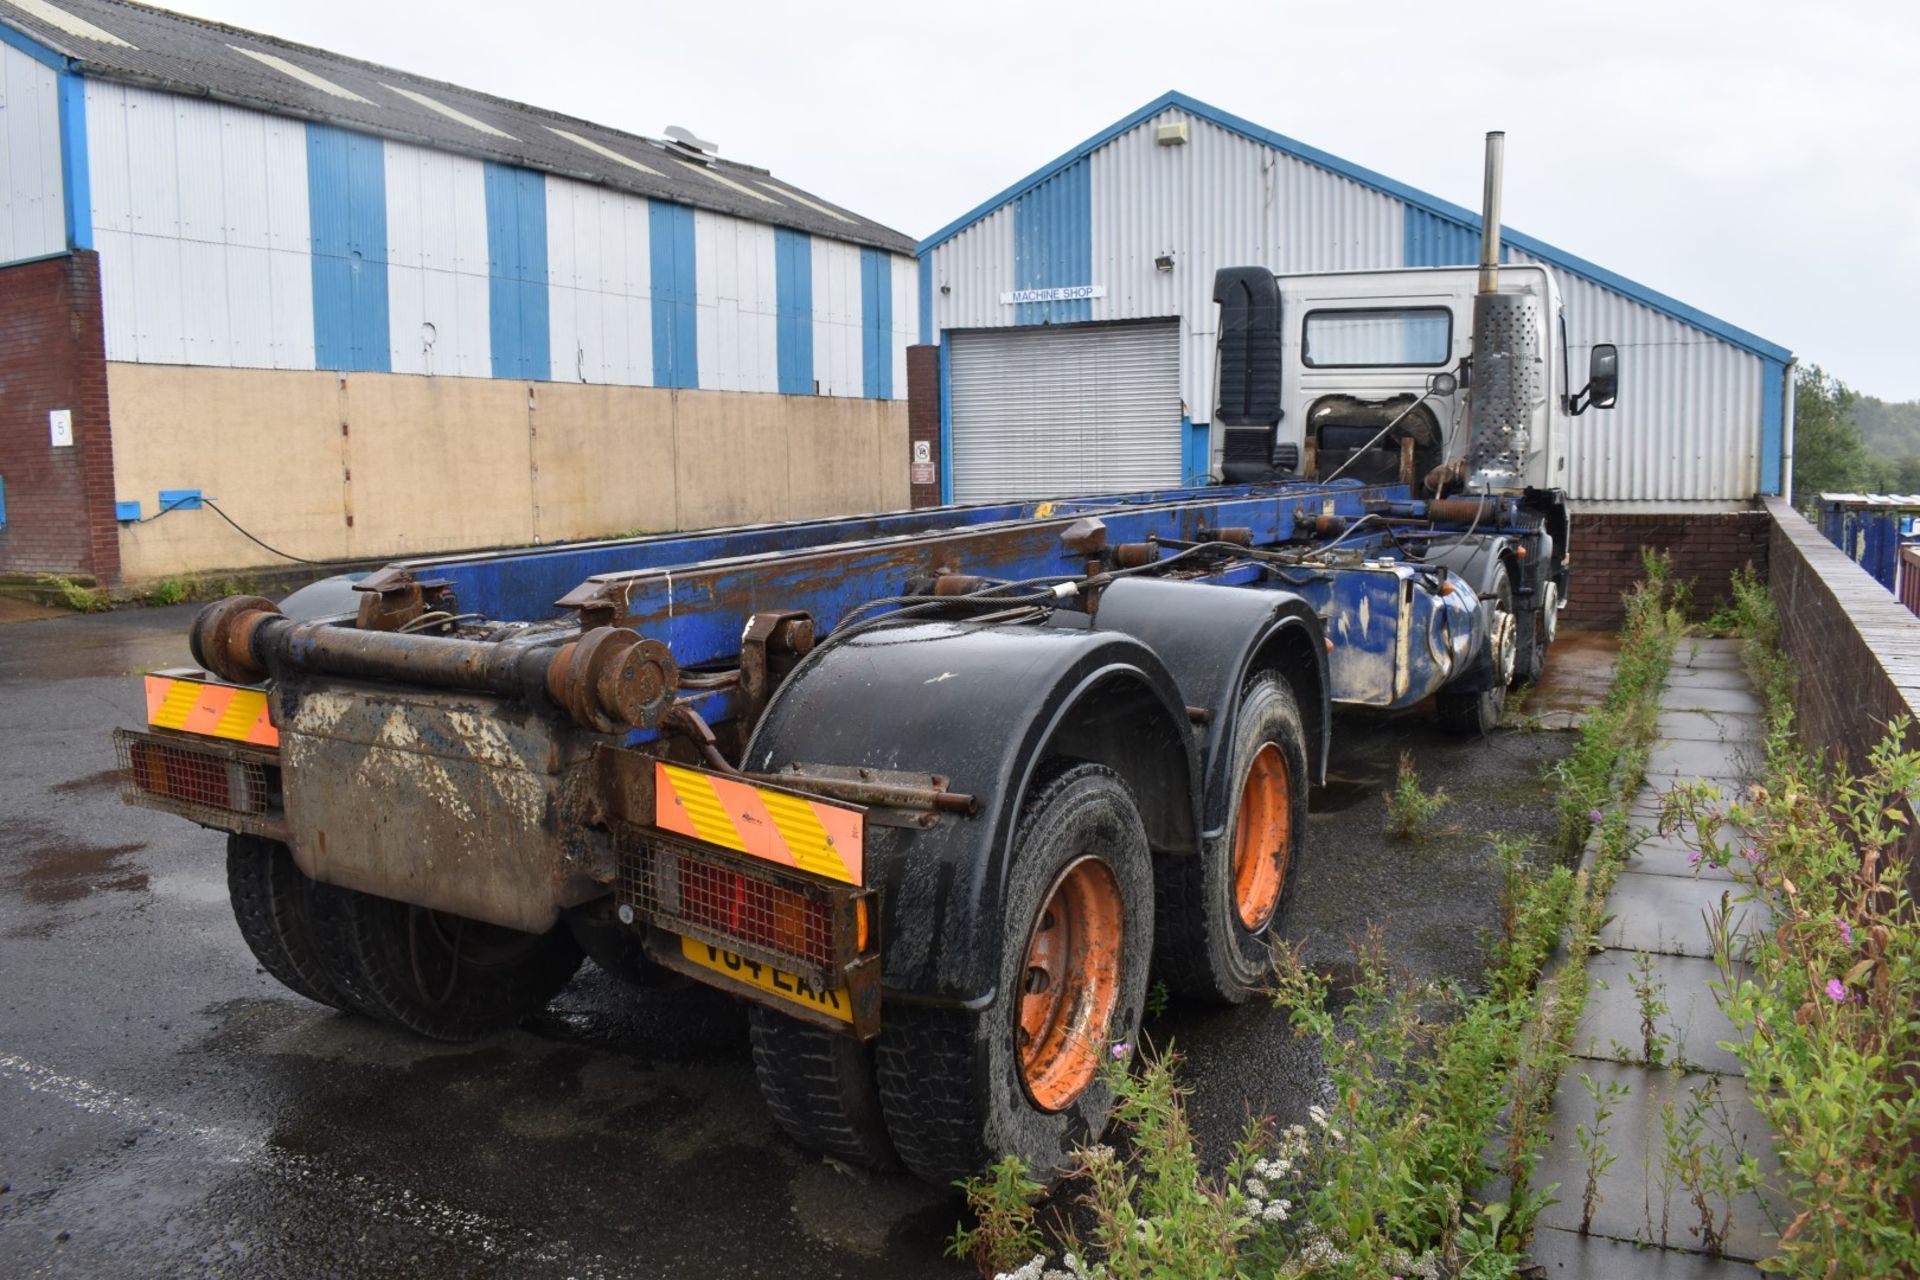 1 x Volvo 340 Plant Lorry With Tipper Chasis and Fitted Winch - CL547 - Location: South Yorkshire. - Image 17 of 25